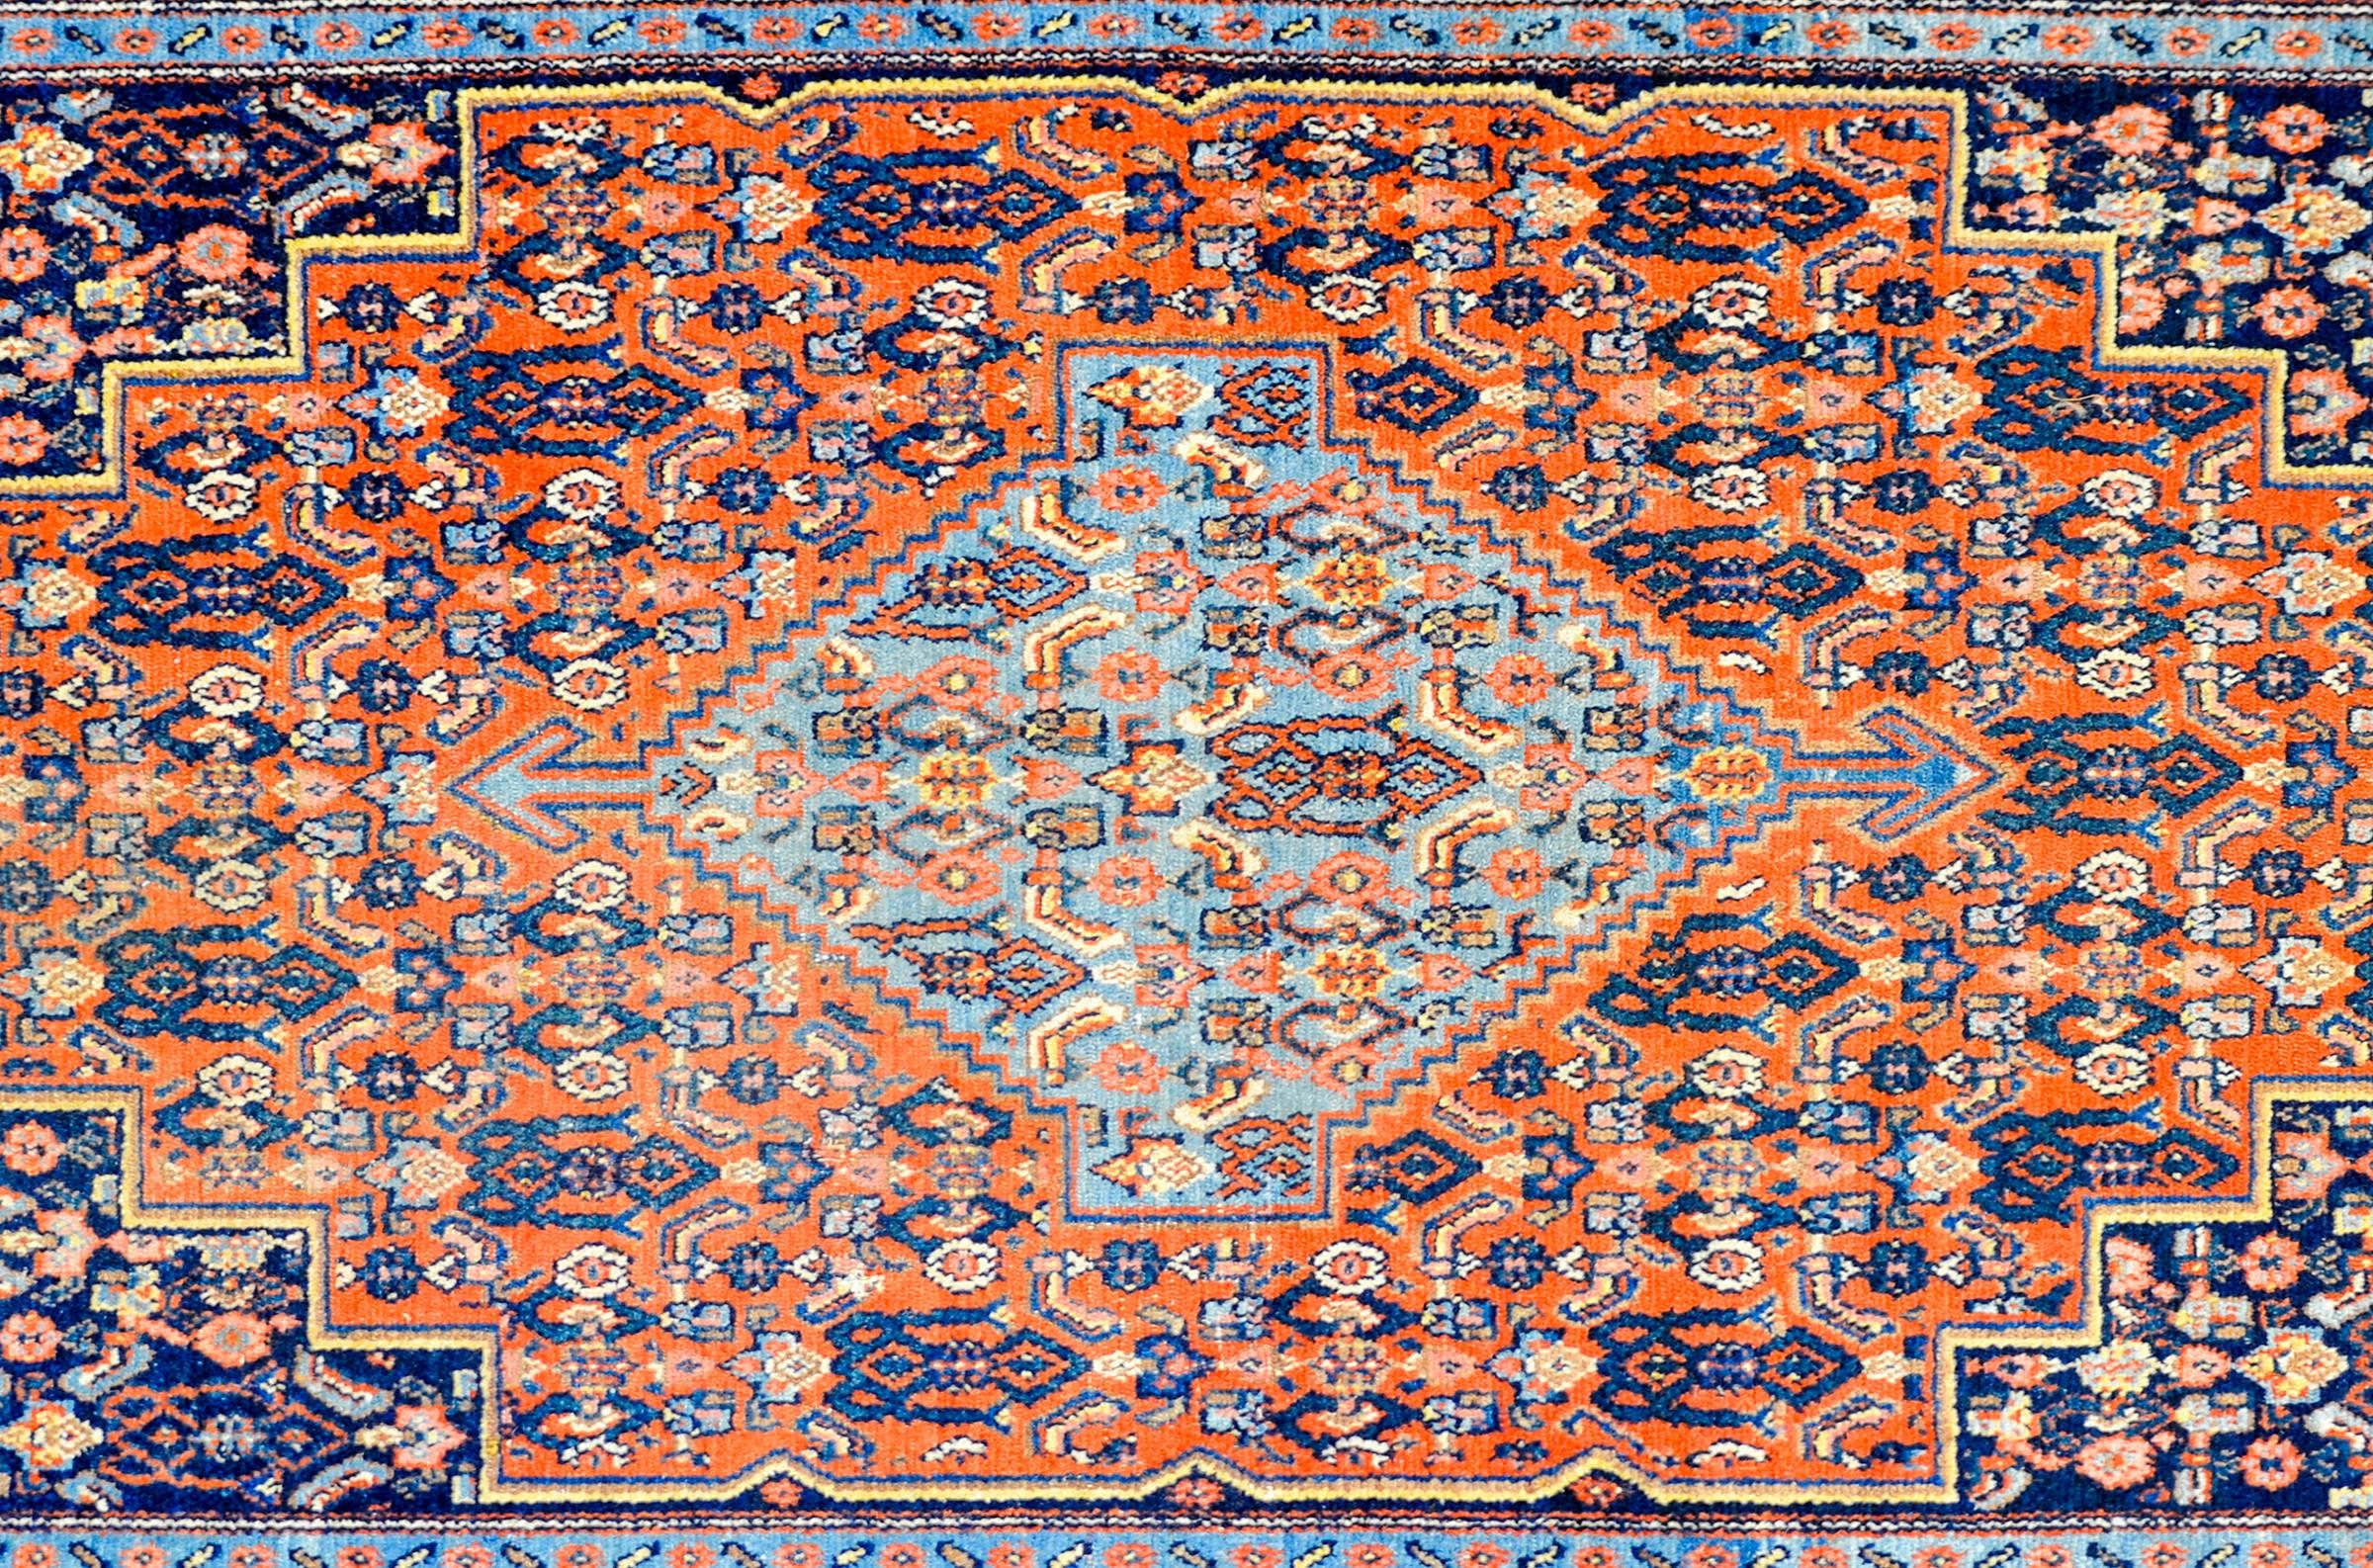 A beautiful early 20th century Persian Seneh rug with a wonderful diamond medallion woven with an all-over multicolored trellised floral pattern, on a light indigo background, amidst a field woven with a matching trellised floral pattern as the